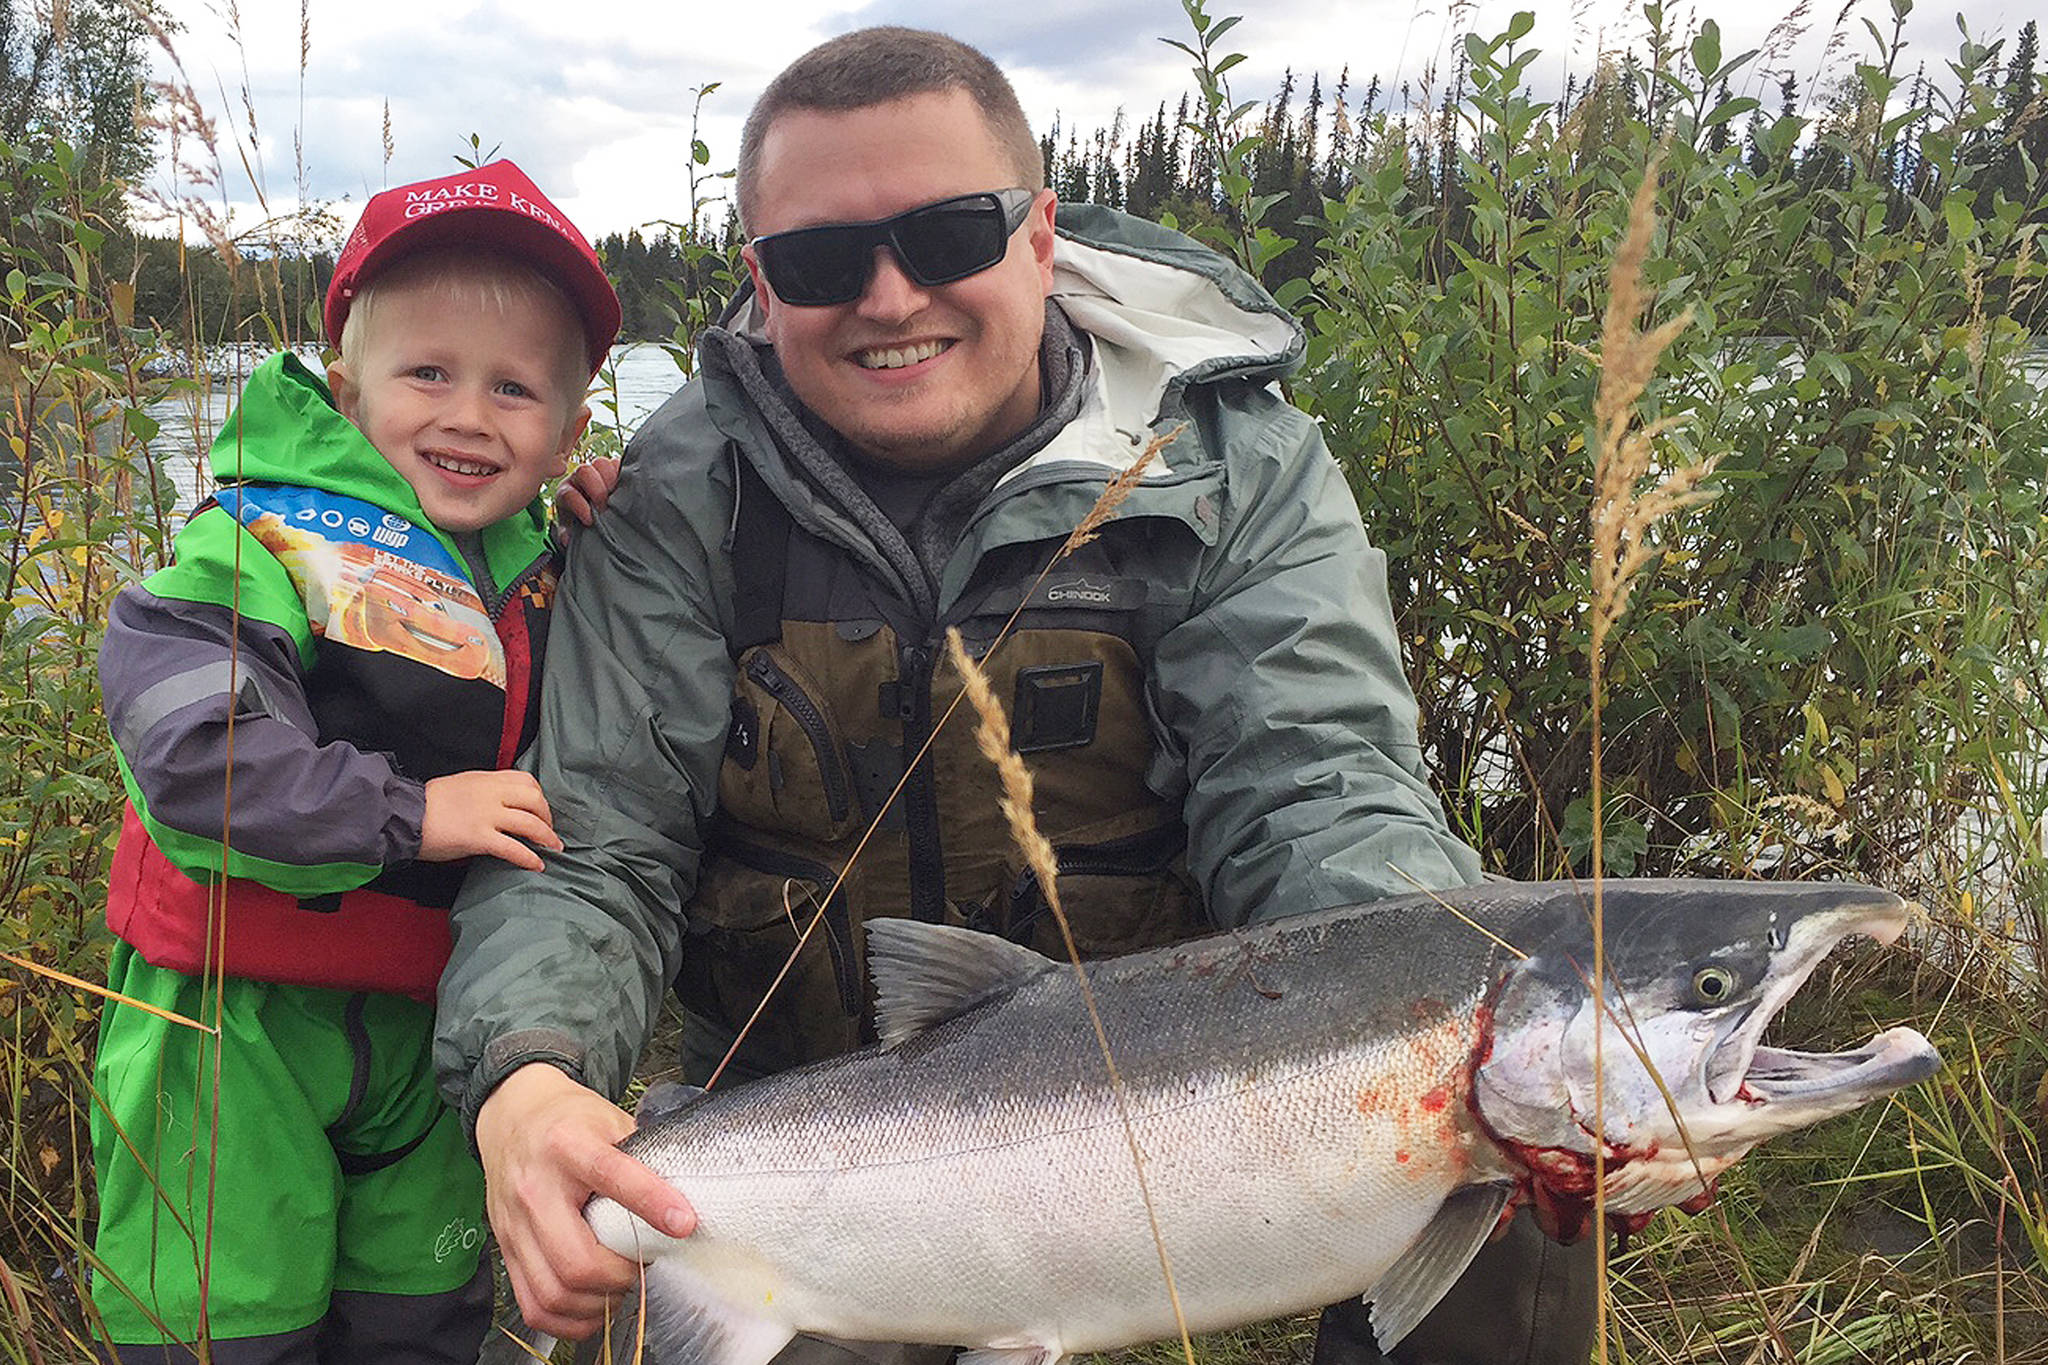 Participants of the Silver Salmon Derby flaunt their catch. The 2019 Derby begins this weekend and will continue to Sept. 22, 2019. (Photo provided by the Kenai Chamber of Commerce)